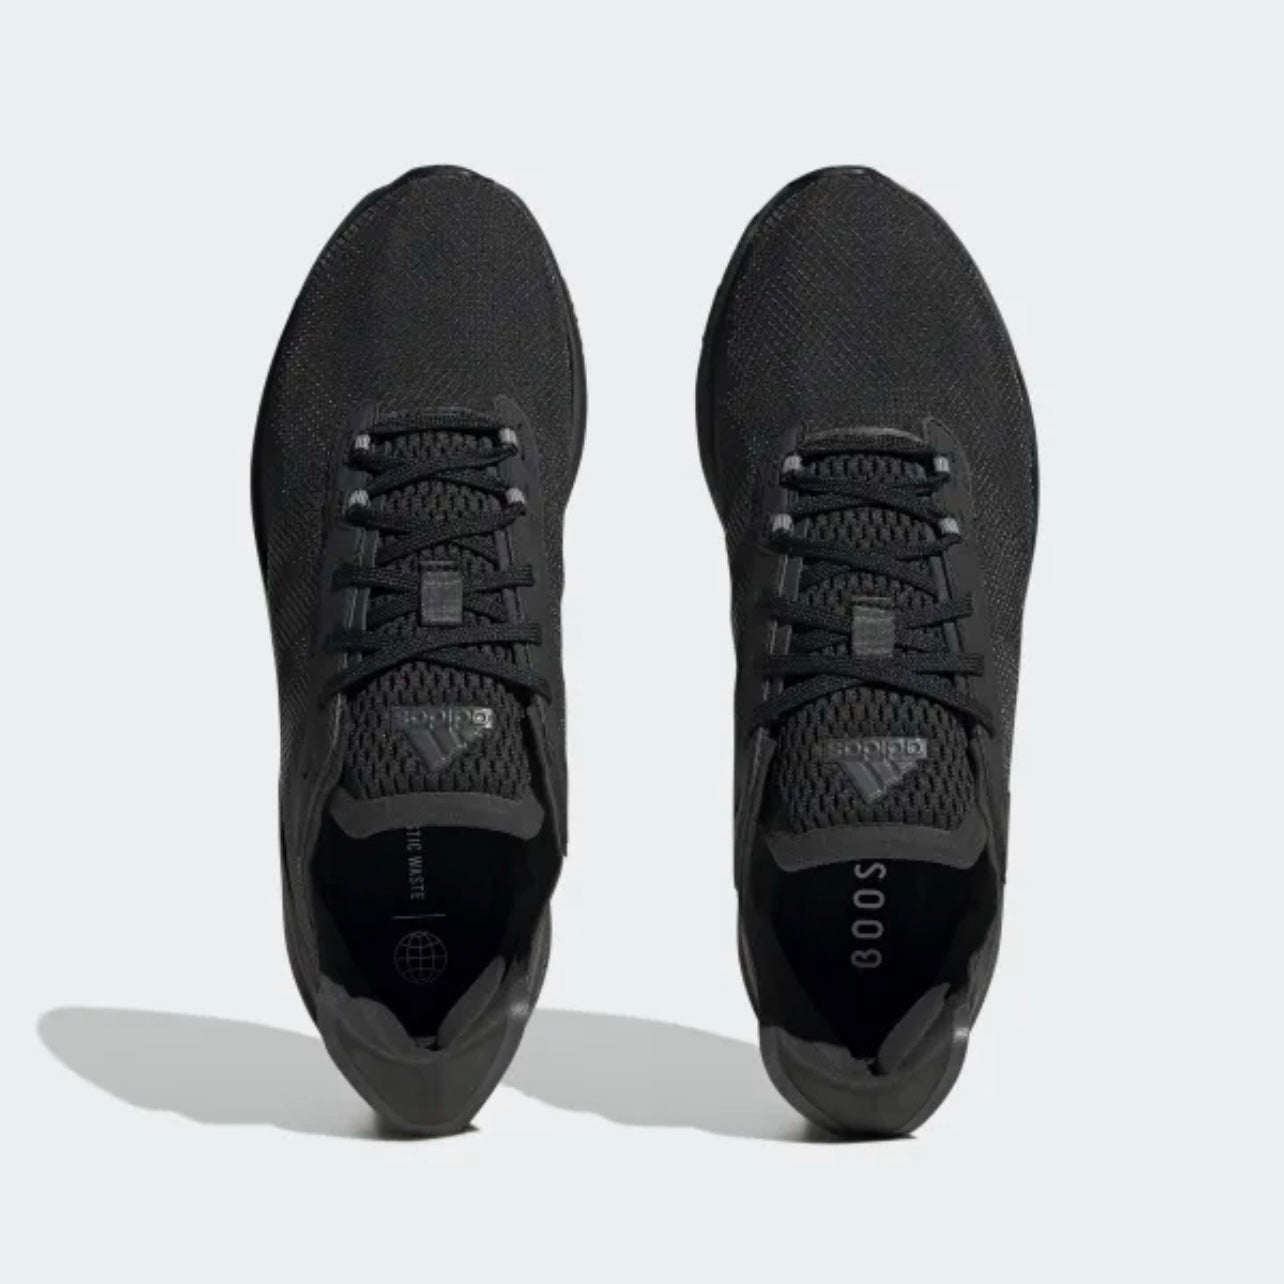 Adidas sneakers for men (HP5982)in black and black